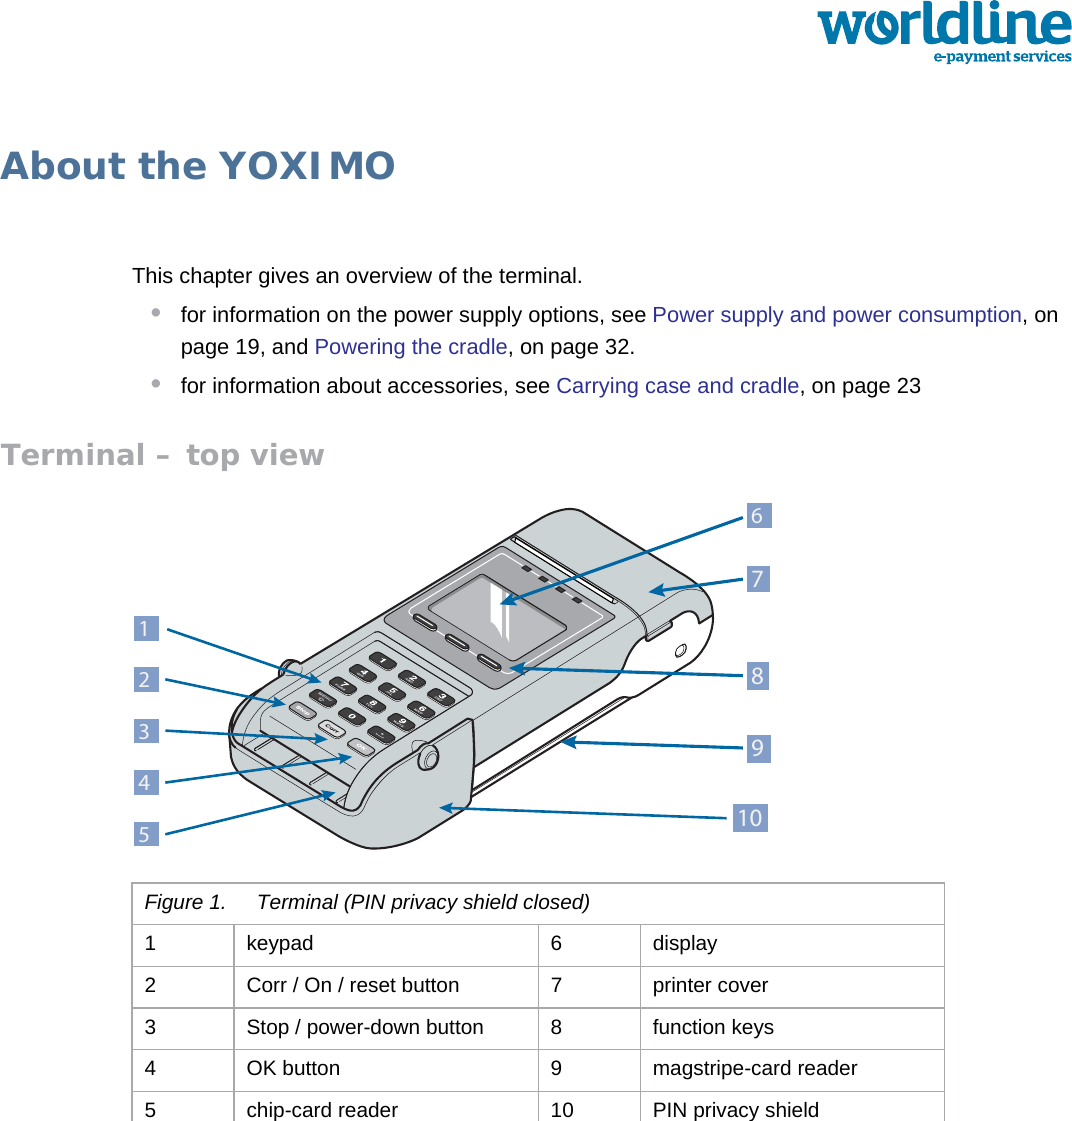 public 3om_yxm_description.fm document release 1.1 last updated 30/9/15About the YOXIMOThis chapter gives an overview of the terminal.•for information on the power supply options, see Power supply and power consumption, on page 19, and Powering the cradle, on page 32.•for information about accessories, see Carrying case and cradle, on page 23Terminal – top viewFigure 1. Terminal (PIN privacy shield closed)1 keypad 6 display2 Corr / On / reset button 7 printer cover3 Stop / power-down button 8 function keys4 OK button 9 magstripe-card reader5 chip-card reader 10 PIN privacy shield78910213465